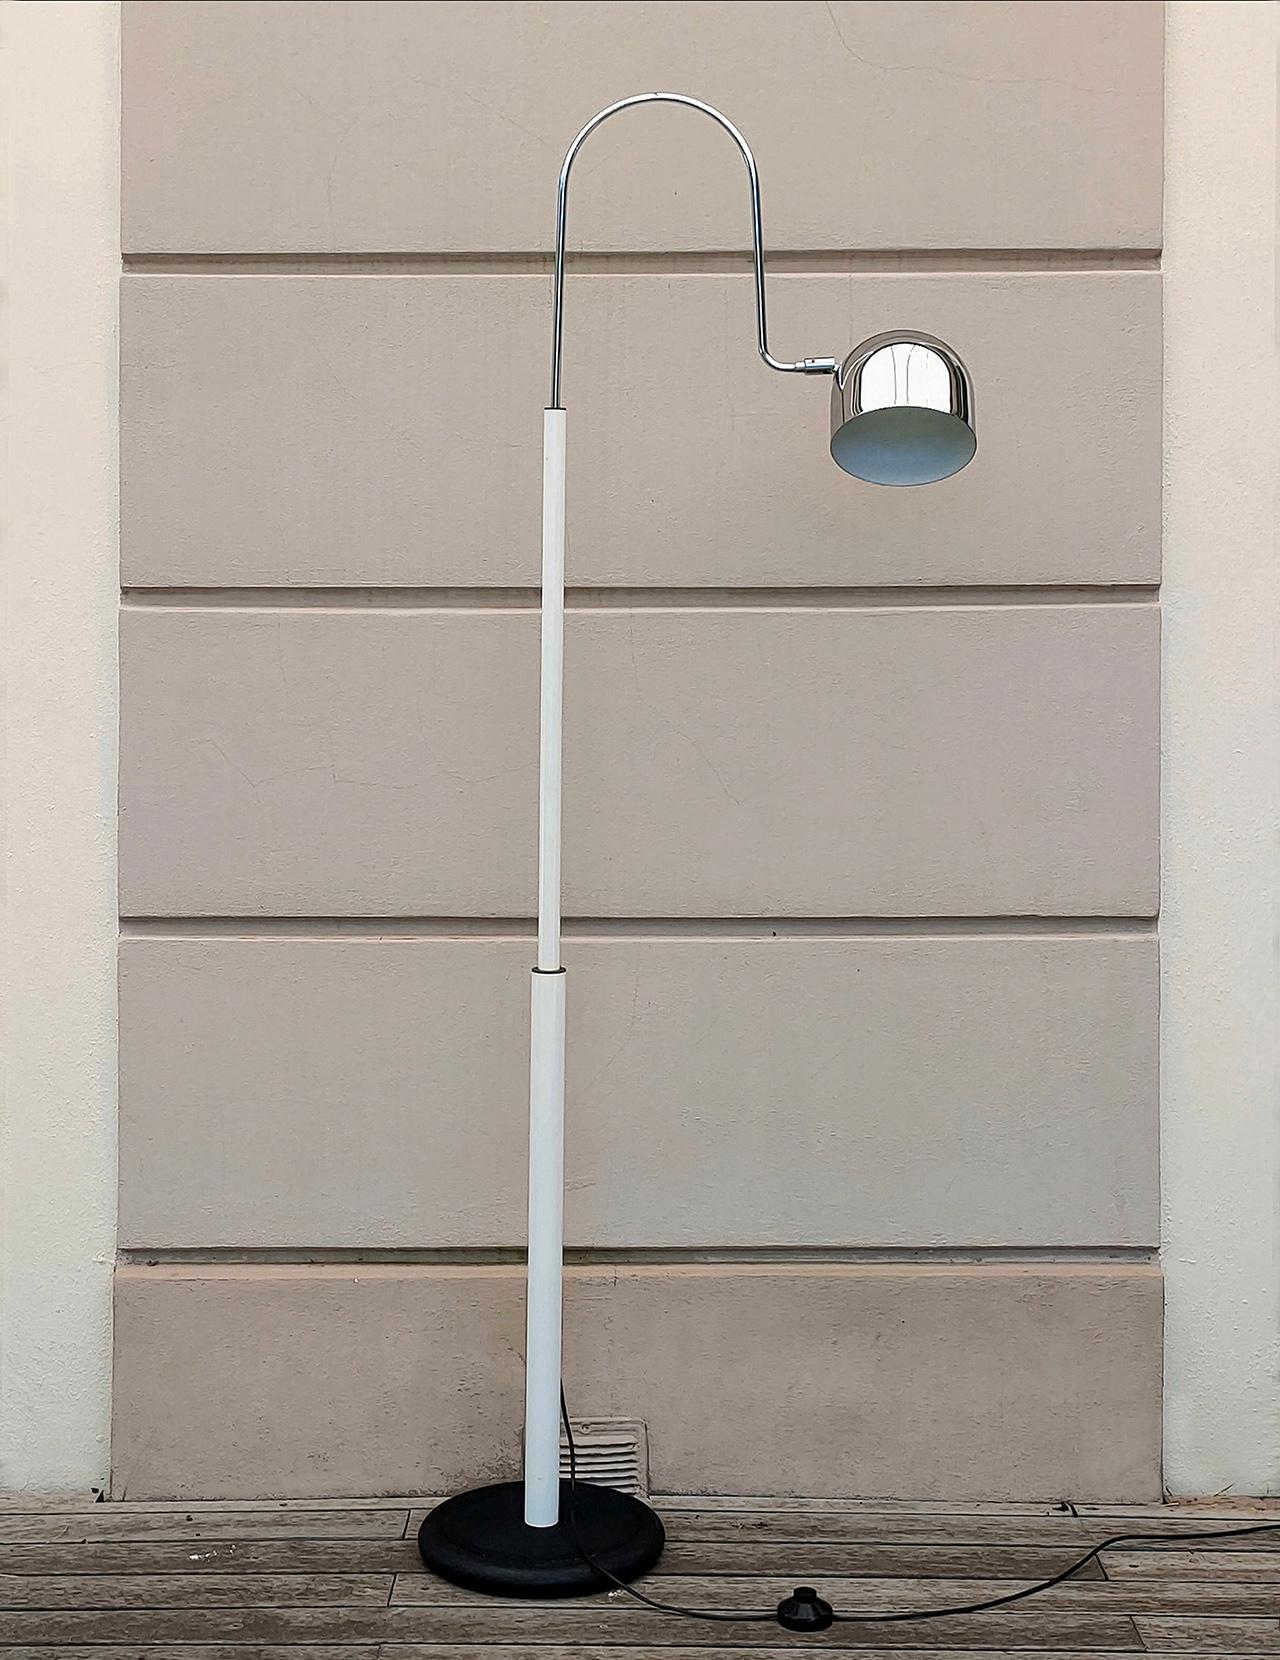 Floor lamp model Bridge was designed by the Aroldi brothers, Danilo and Corrado, in the early 1970s and produced by the famous Italian company Stilnovo.
The lampshade is in chromed metal fully swivel and directable in multiple ways, movable chrome